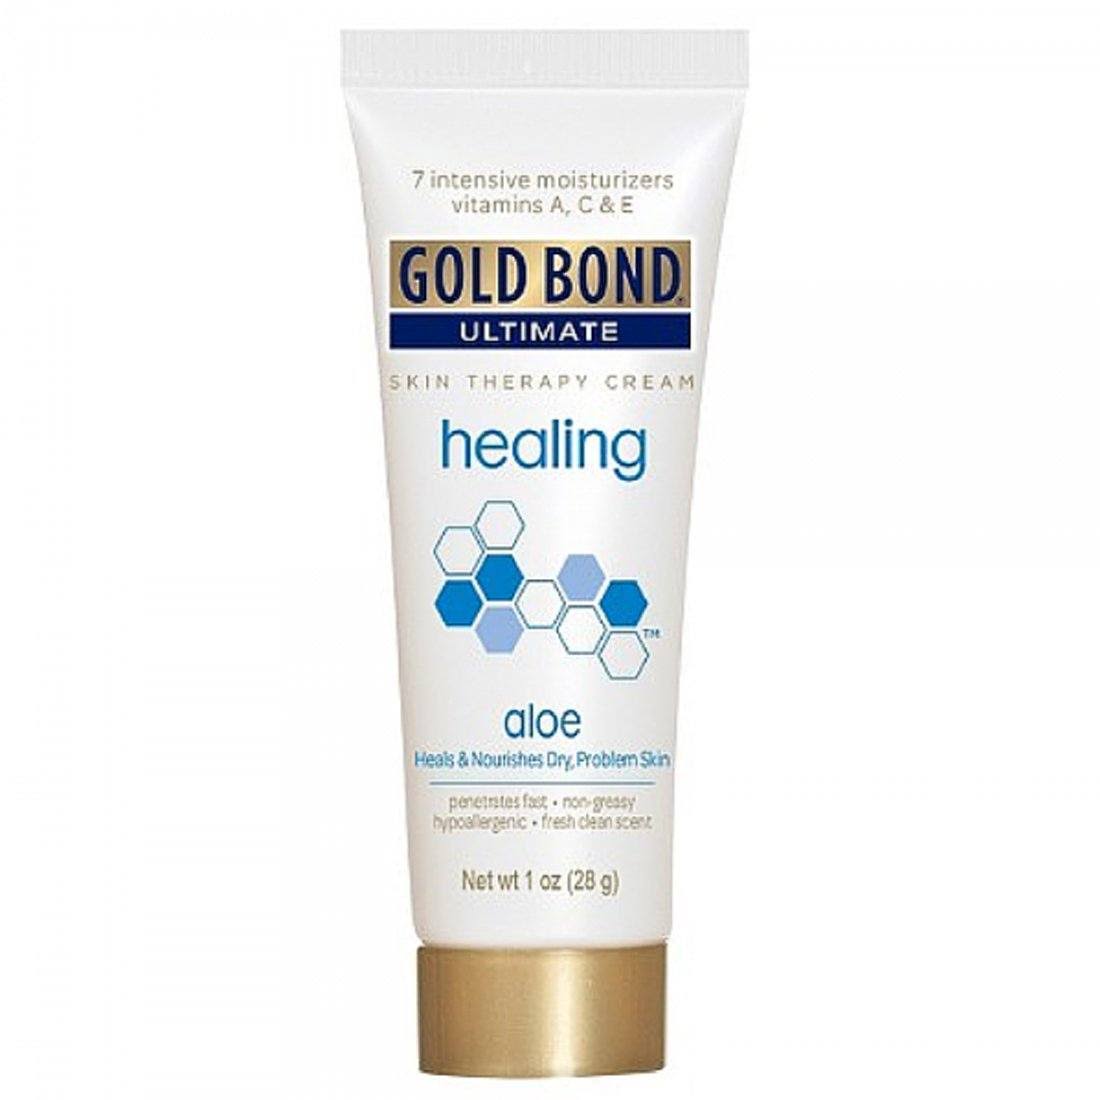 Gold Bond Ultimate Healing Skin Therapy Lotion - Aloe, 30ml